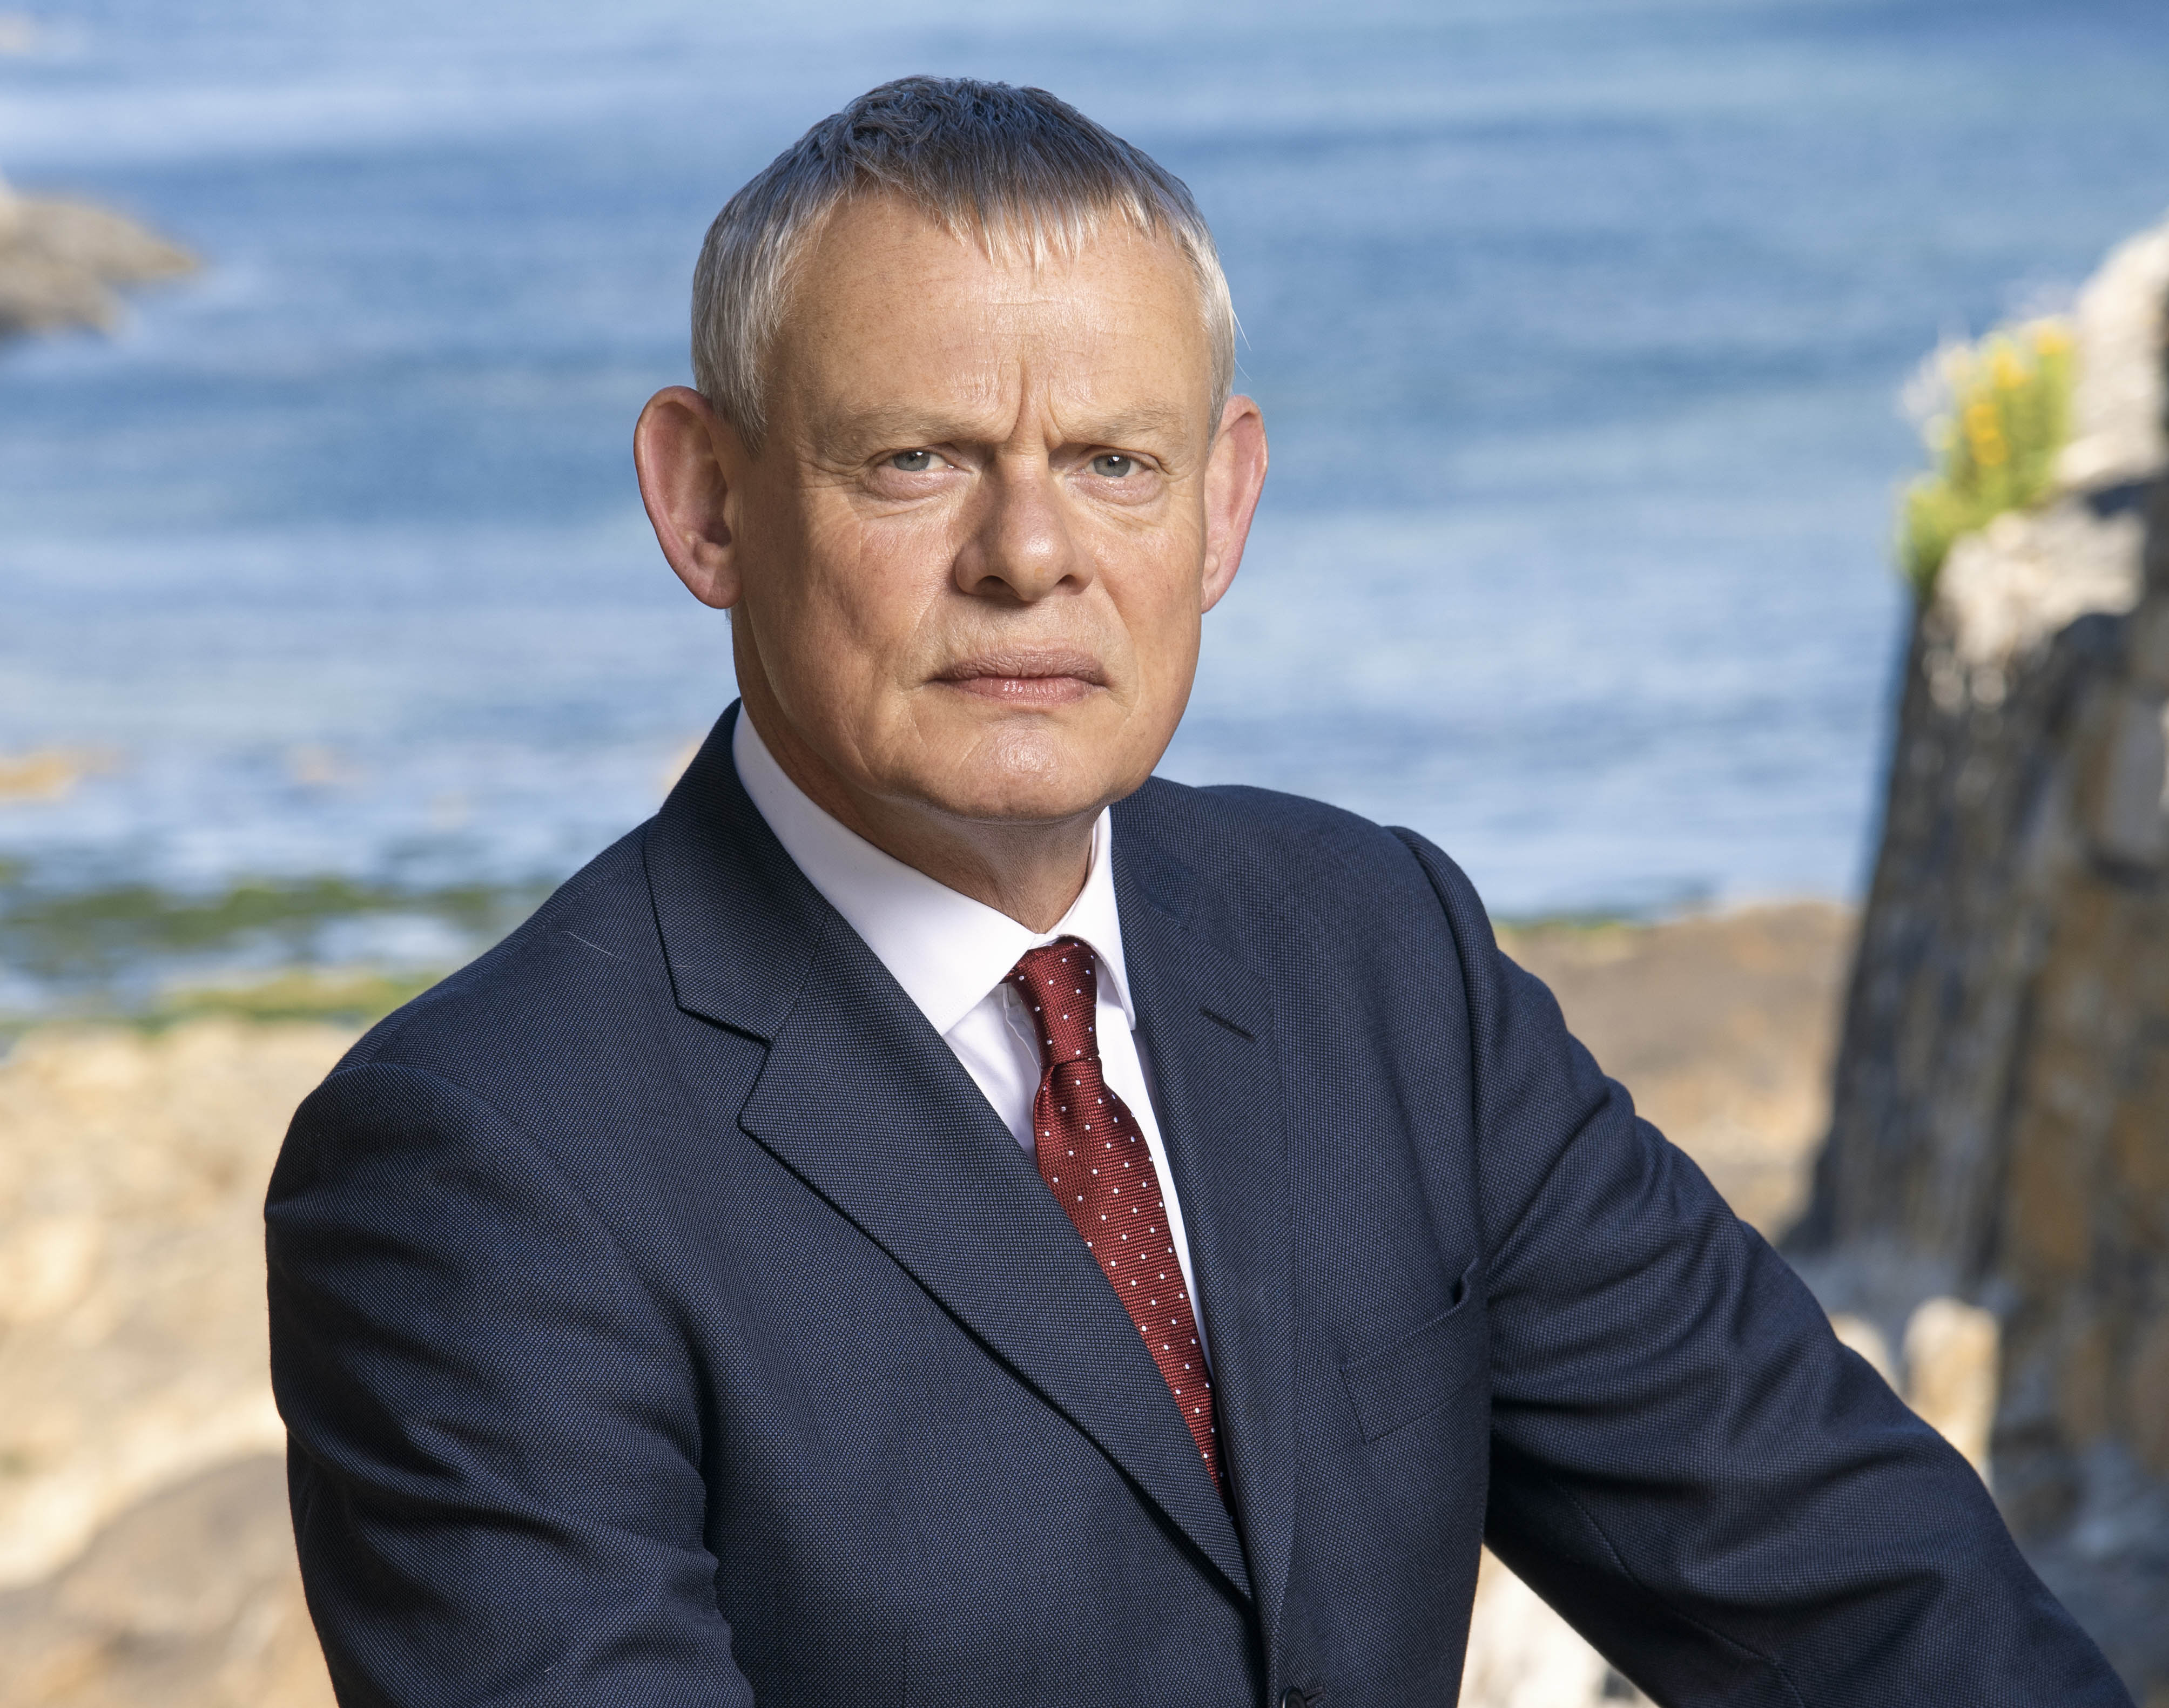 Doc Martin season 10 air date, cast, plot episode guide What to Watch